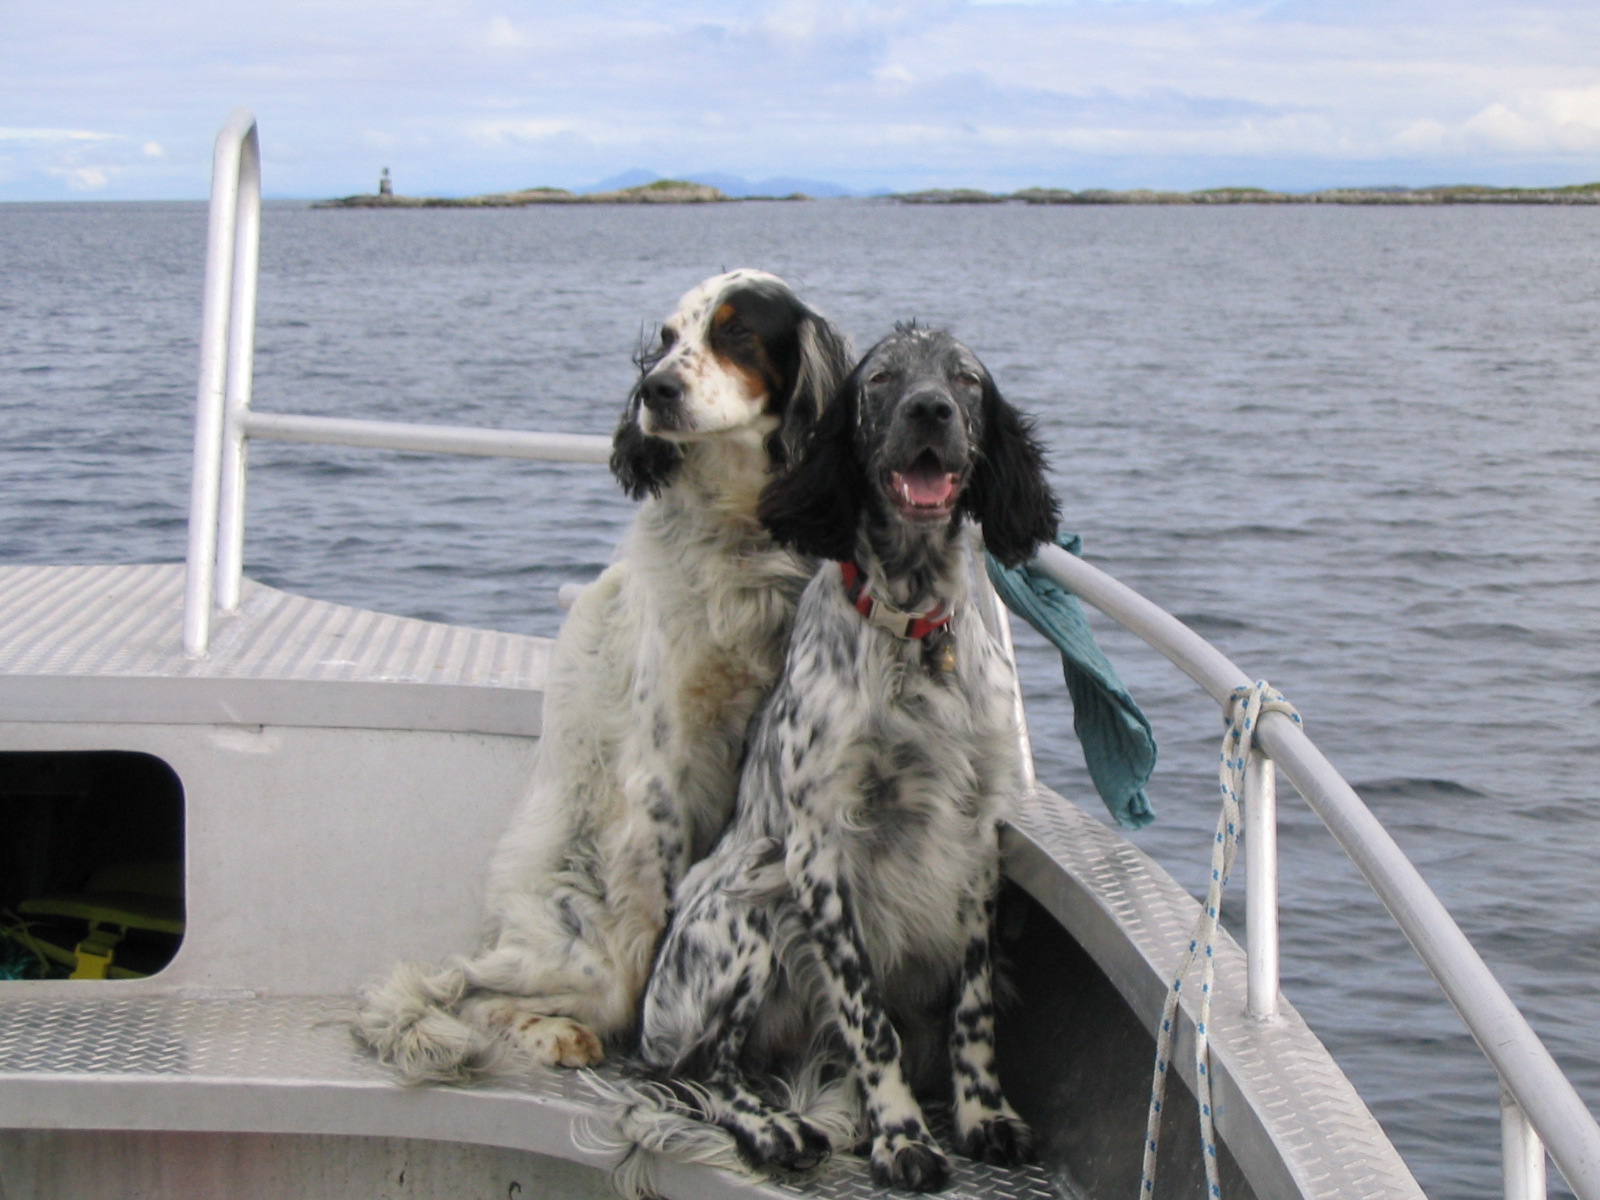 Our dogs love boating!